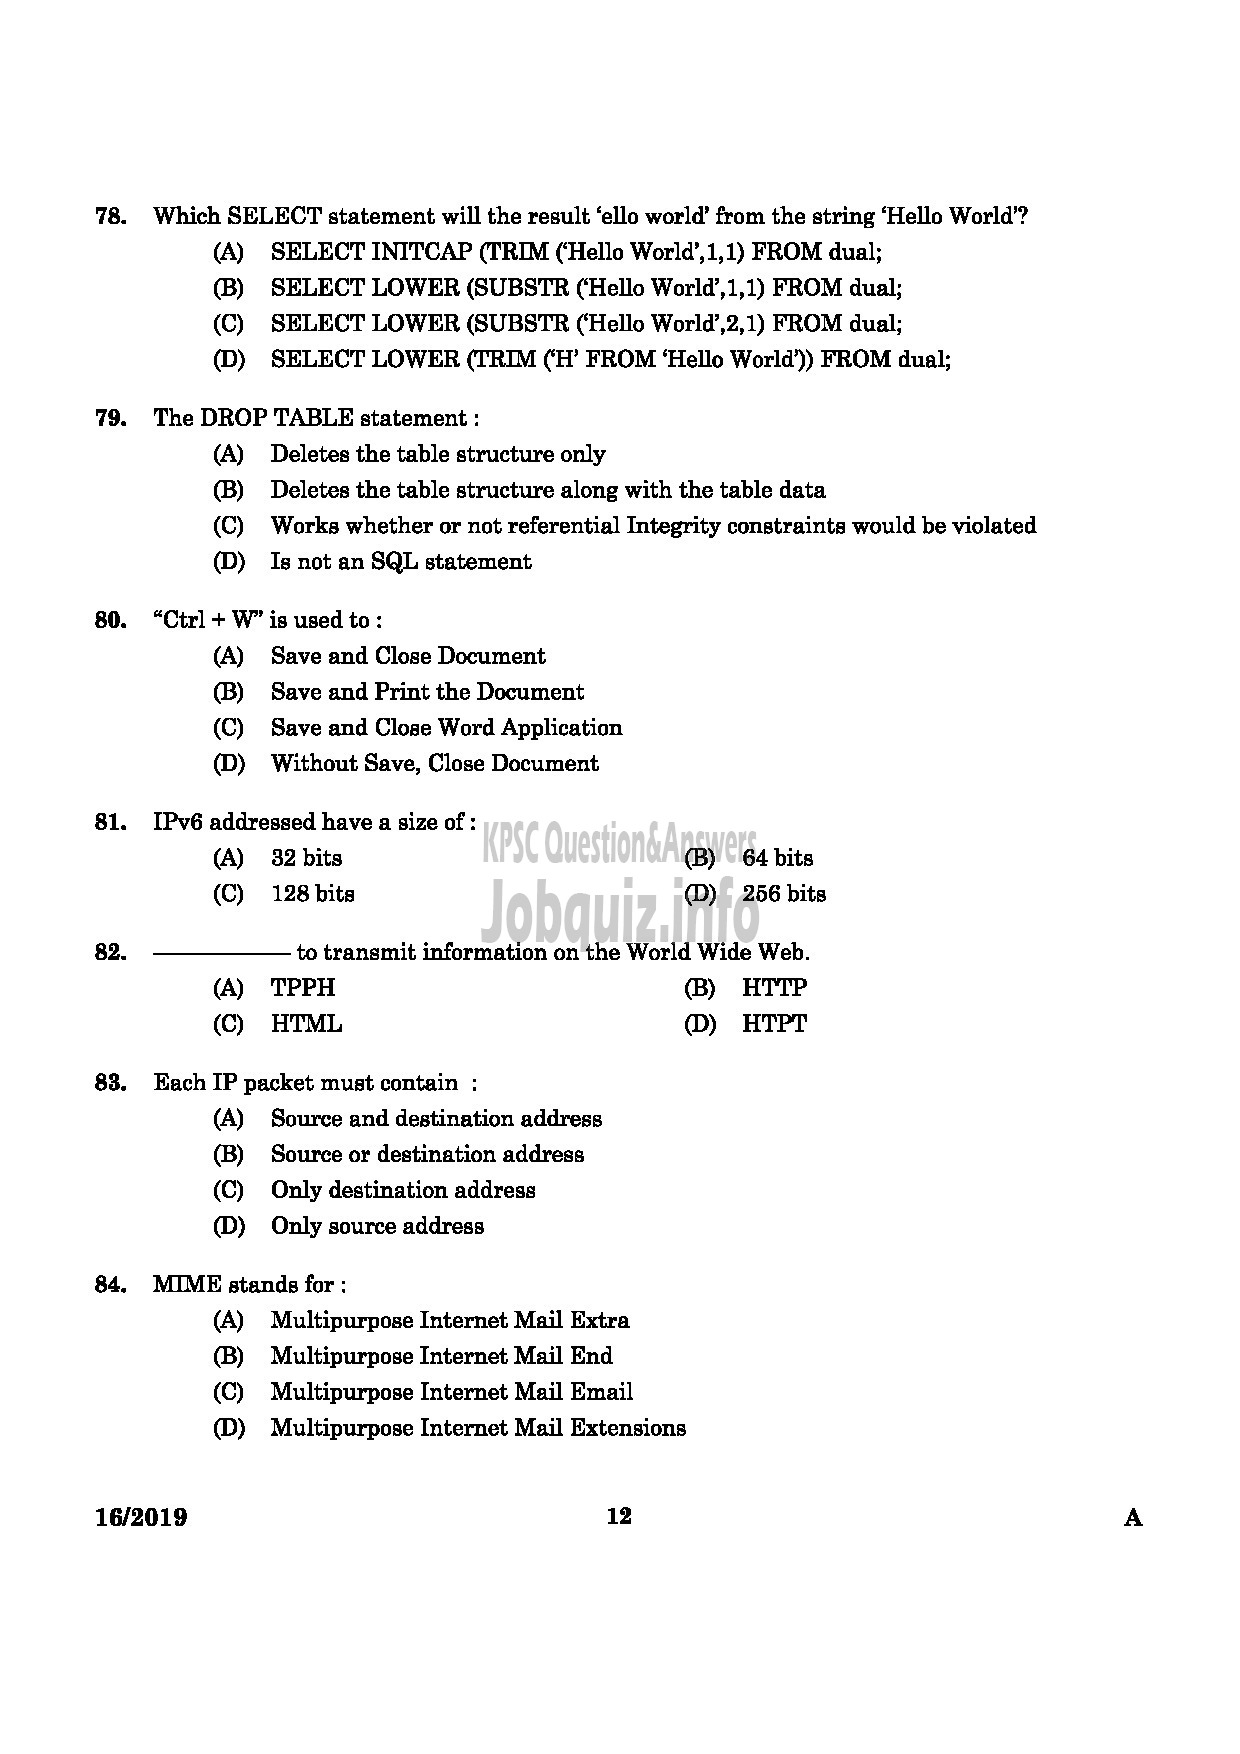 Kerala PSC Question Paper - JUNIOR INSTRUCTOR SOFTWARE TESTING ASSISTANT INDUSTRIAL TRAINING -10